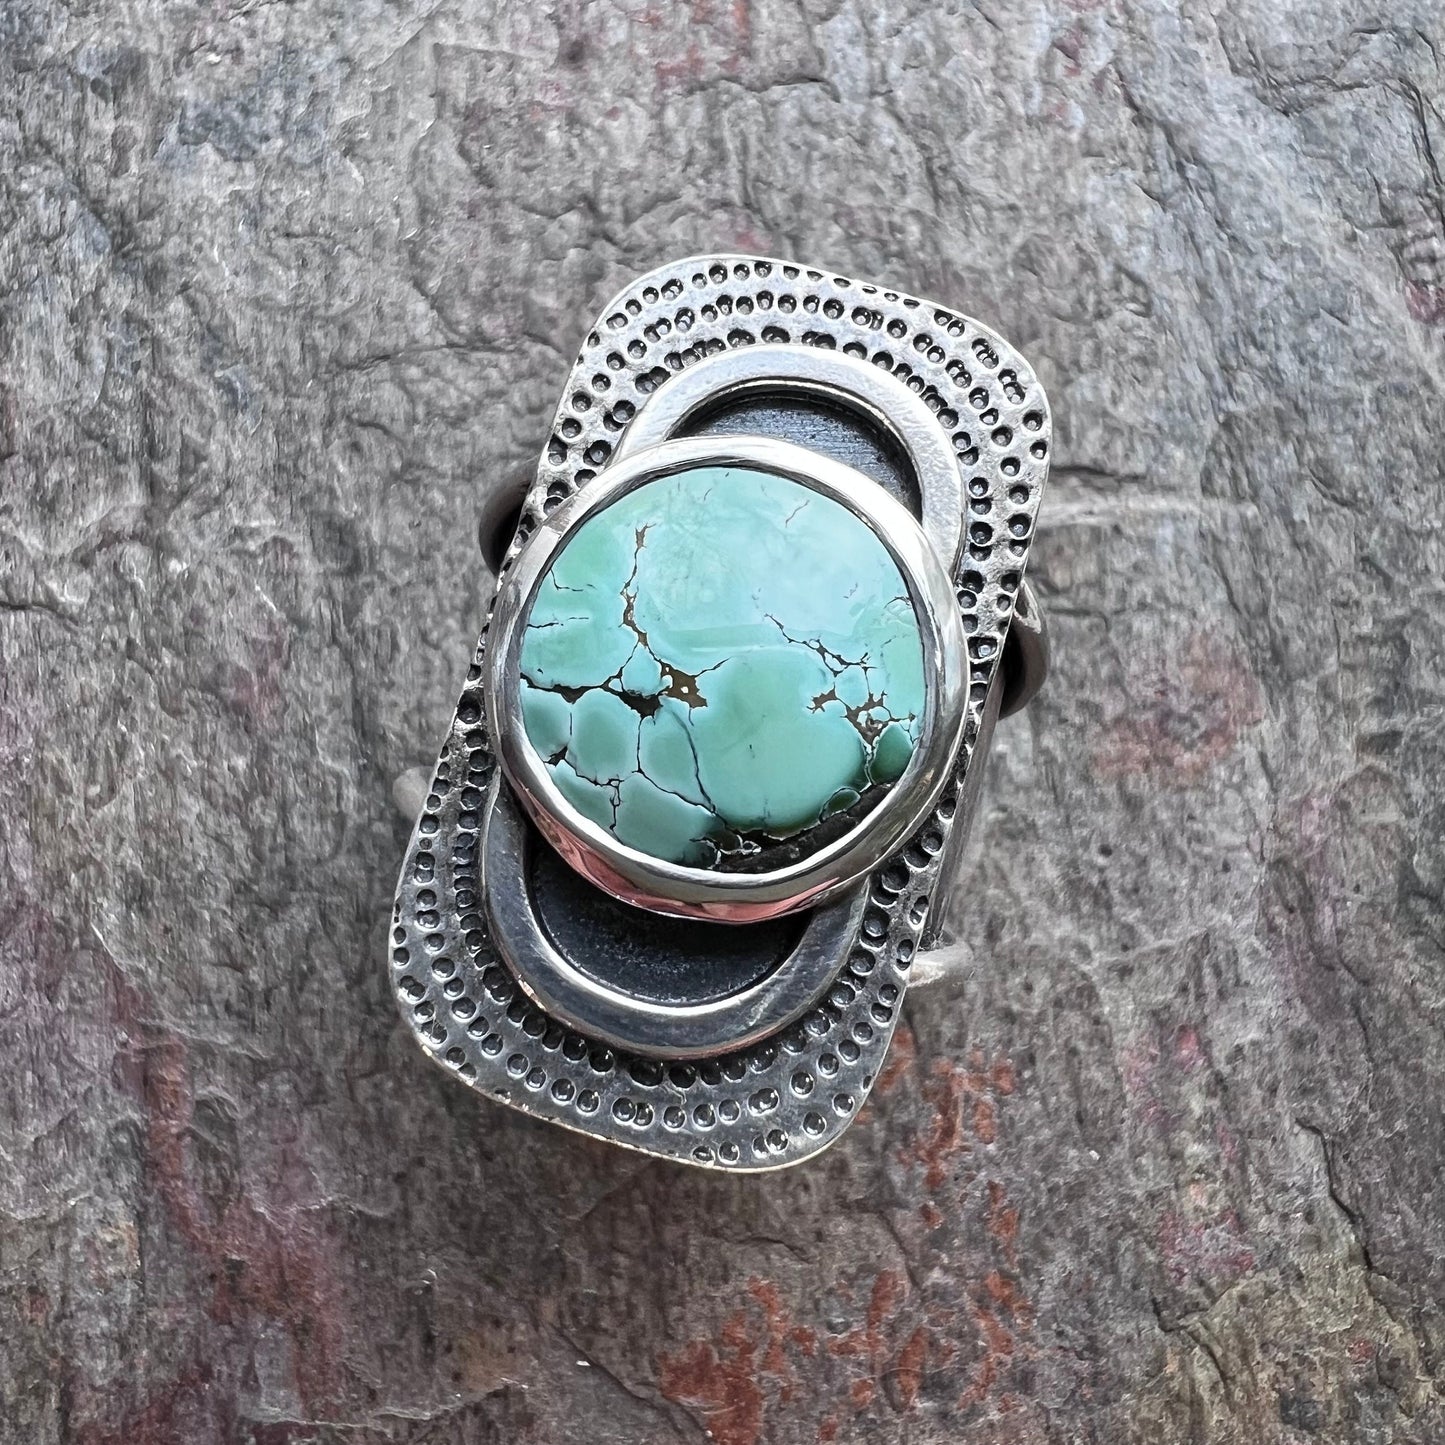 Turquoise Sterling Silver Ring - Genuine Turquoise Handmade One-of-a-kind Artisan Ring